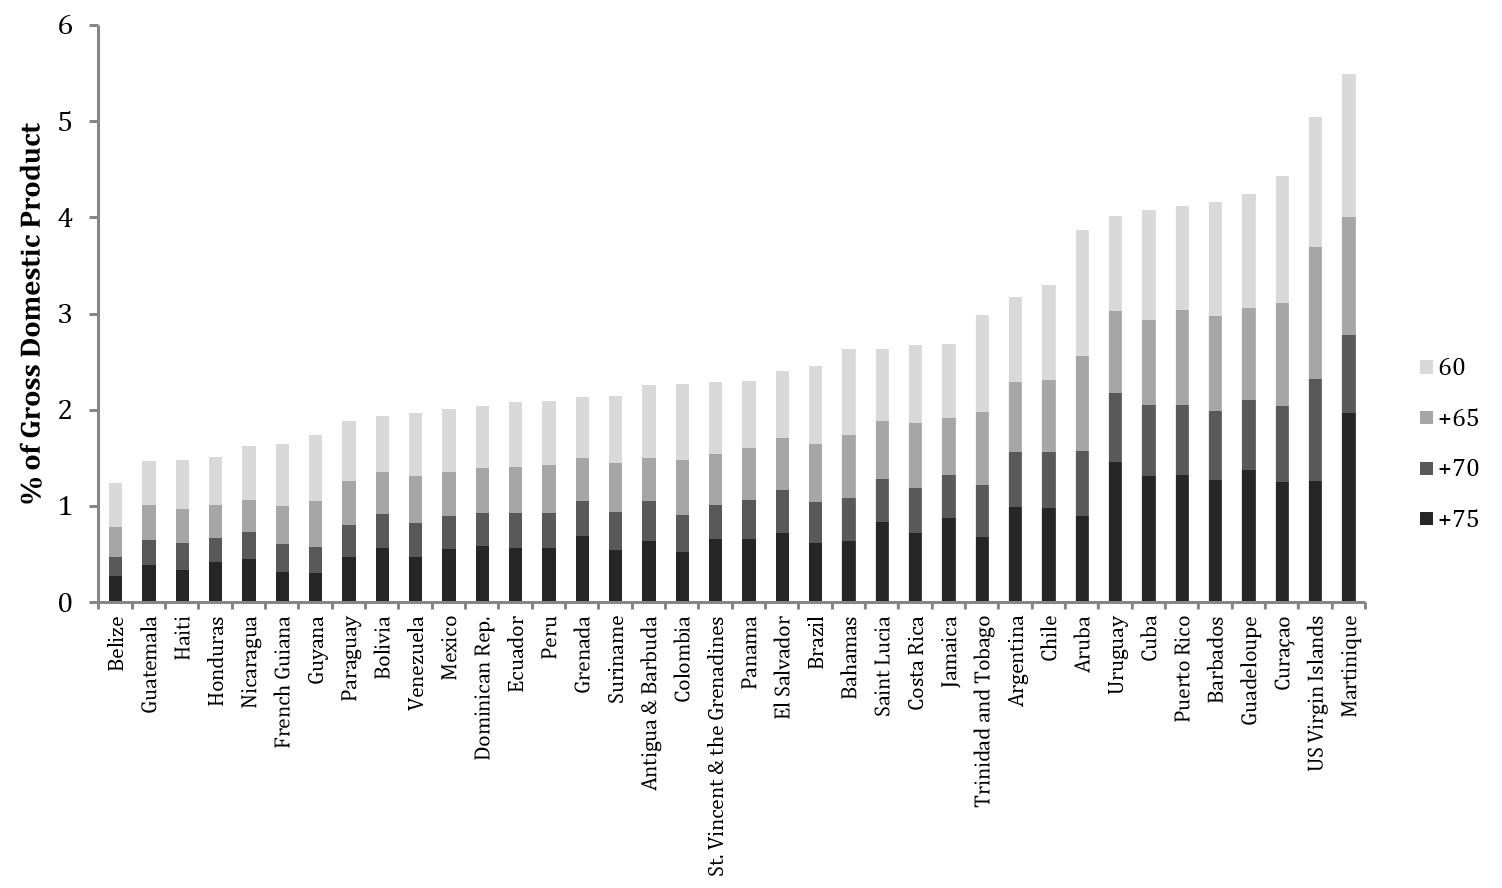 Figure 3: Cost of a basic universal pension equivalent to 20% of the GDP per capita in 38 Latin American and Caribbean countries, author’s calculations; source: UNPD, 2015